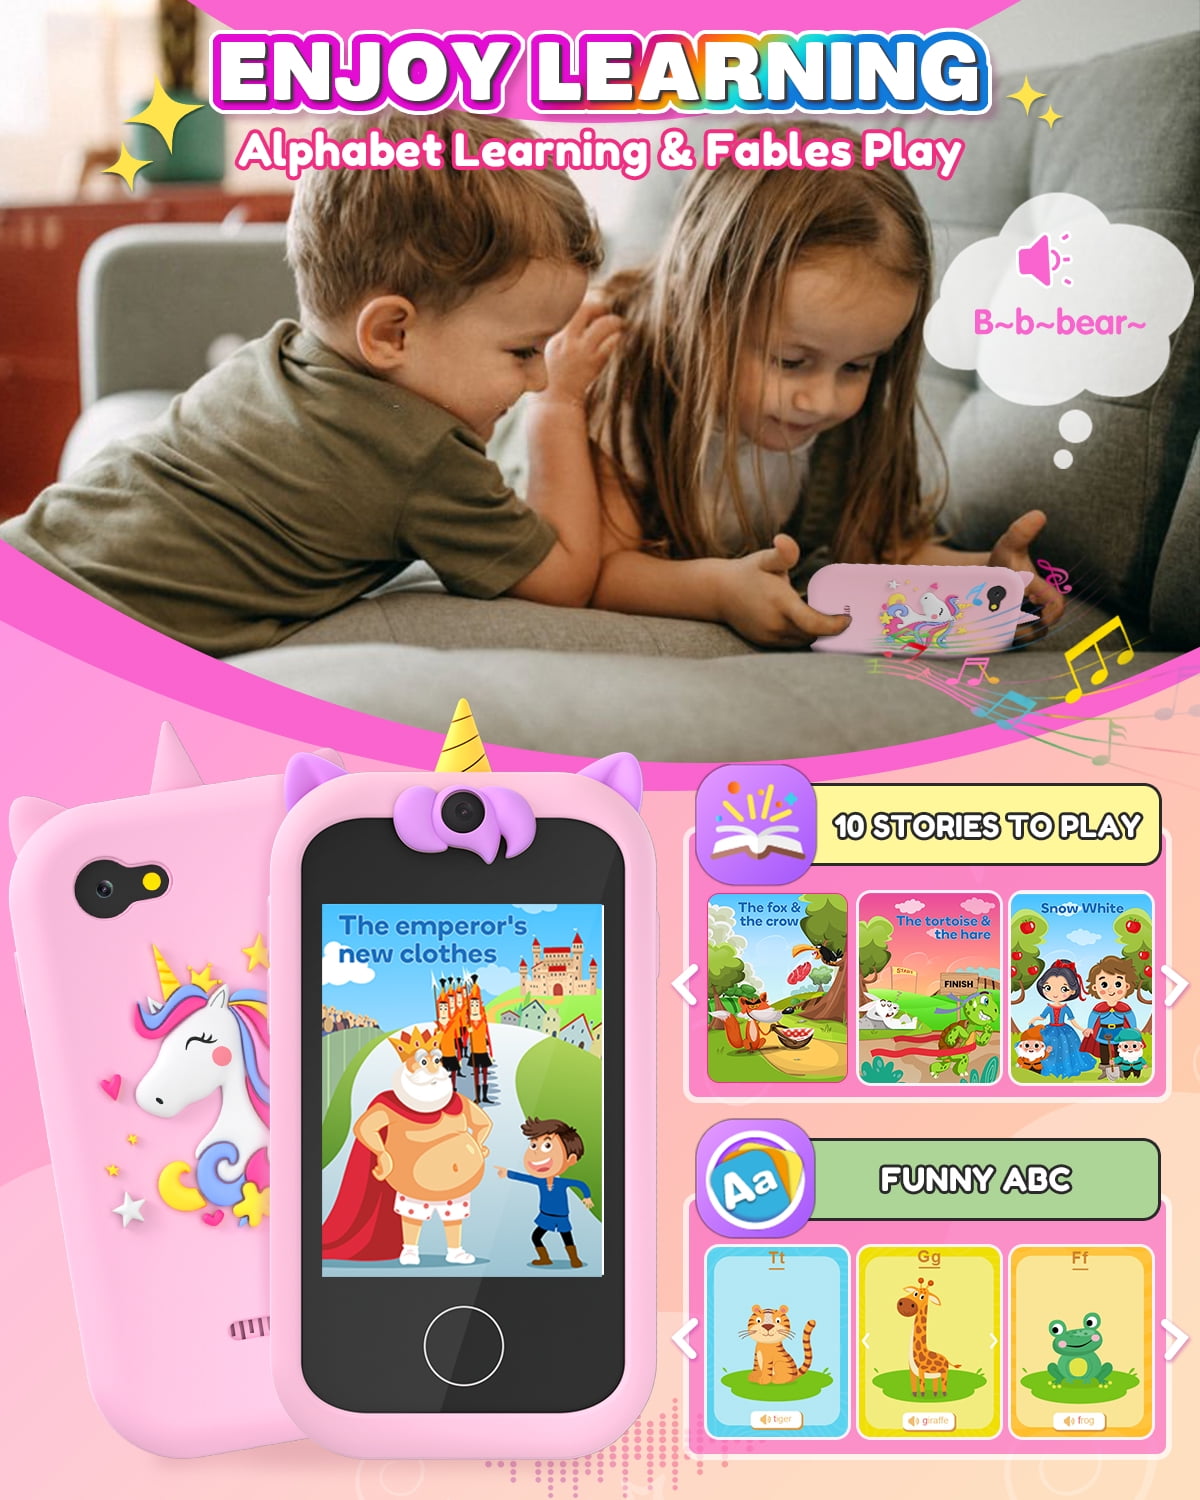 Kids Smart Phone for Girls Unicorns Gifts for Girls Toys 8-10 Years Old  Phone Touchscreen Learning Toy Christmas Birthday Gifts for 3 4 5 6 7 8 9  Year